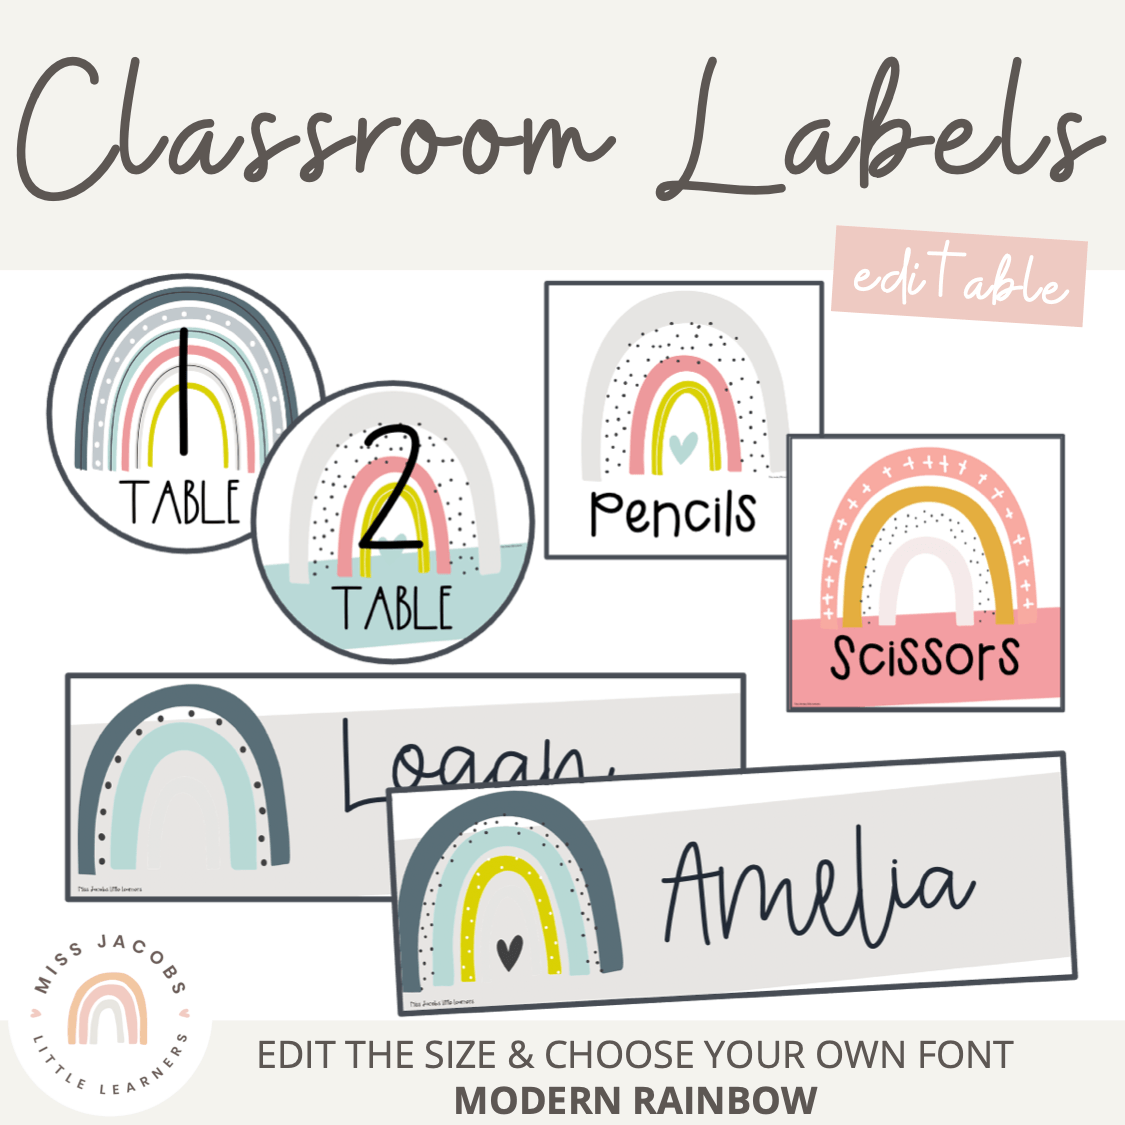 modern-rainbow-classroom-labels-editable-supply-labels-and-student-n